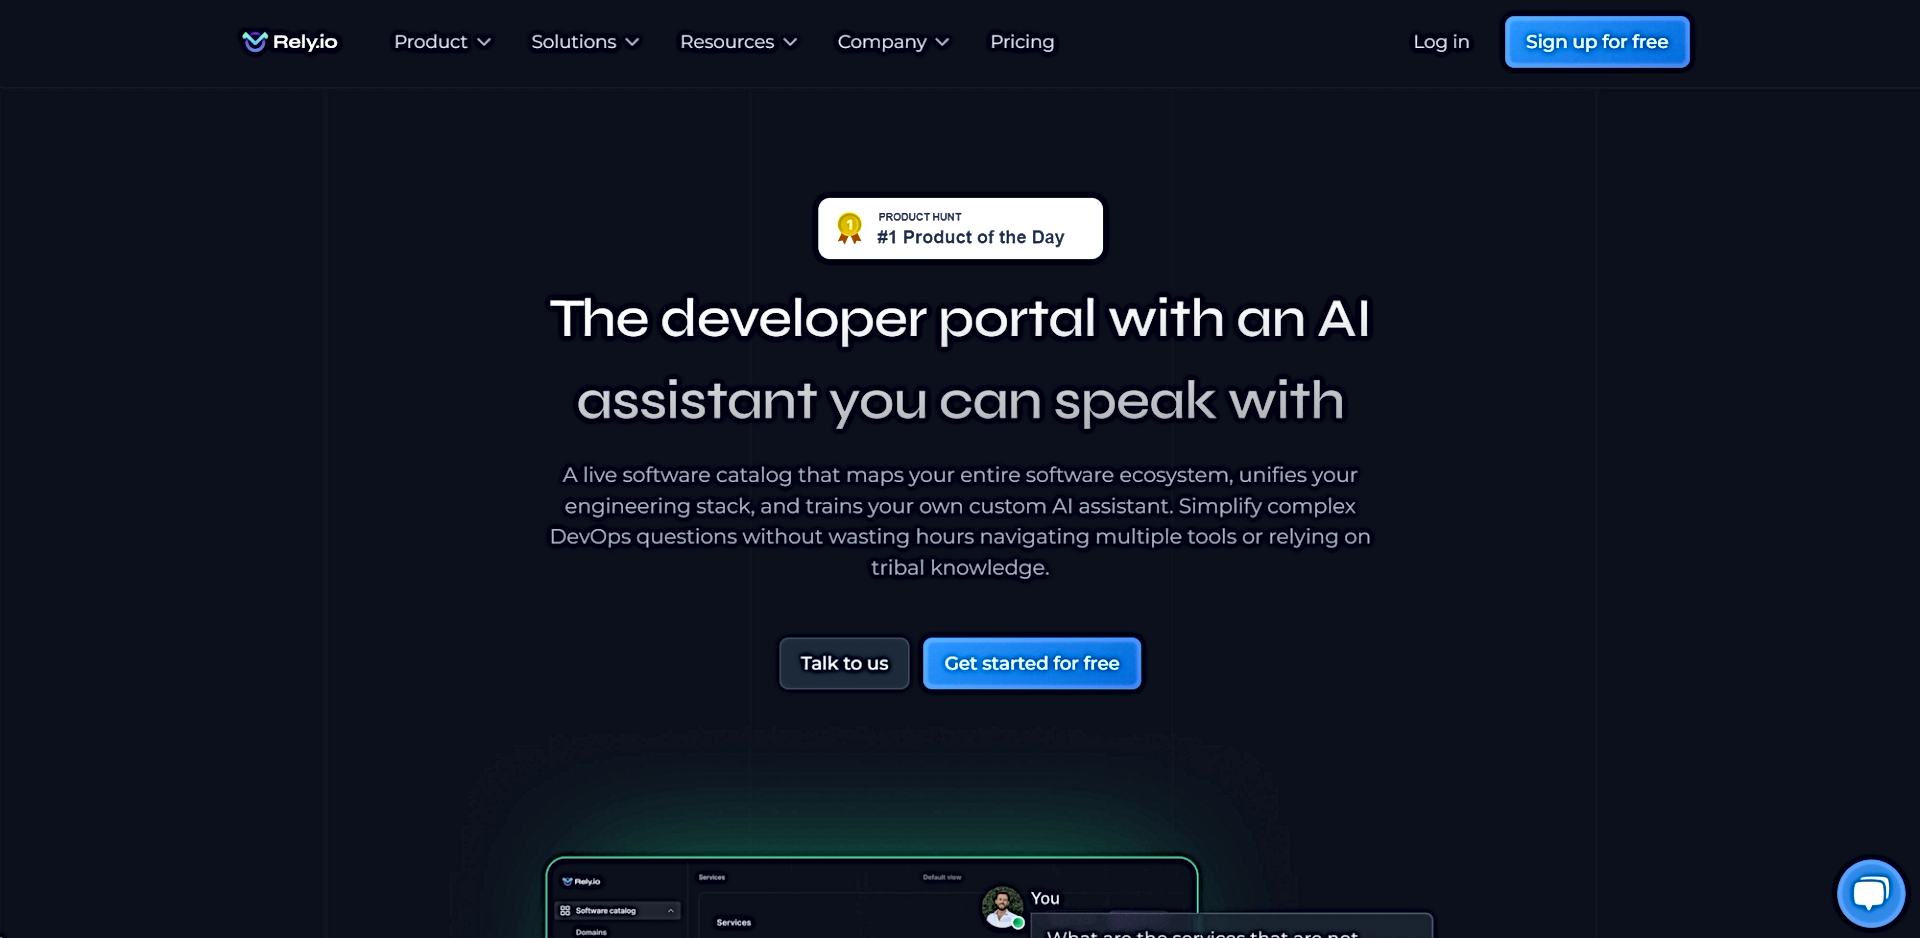 Rely.io featured